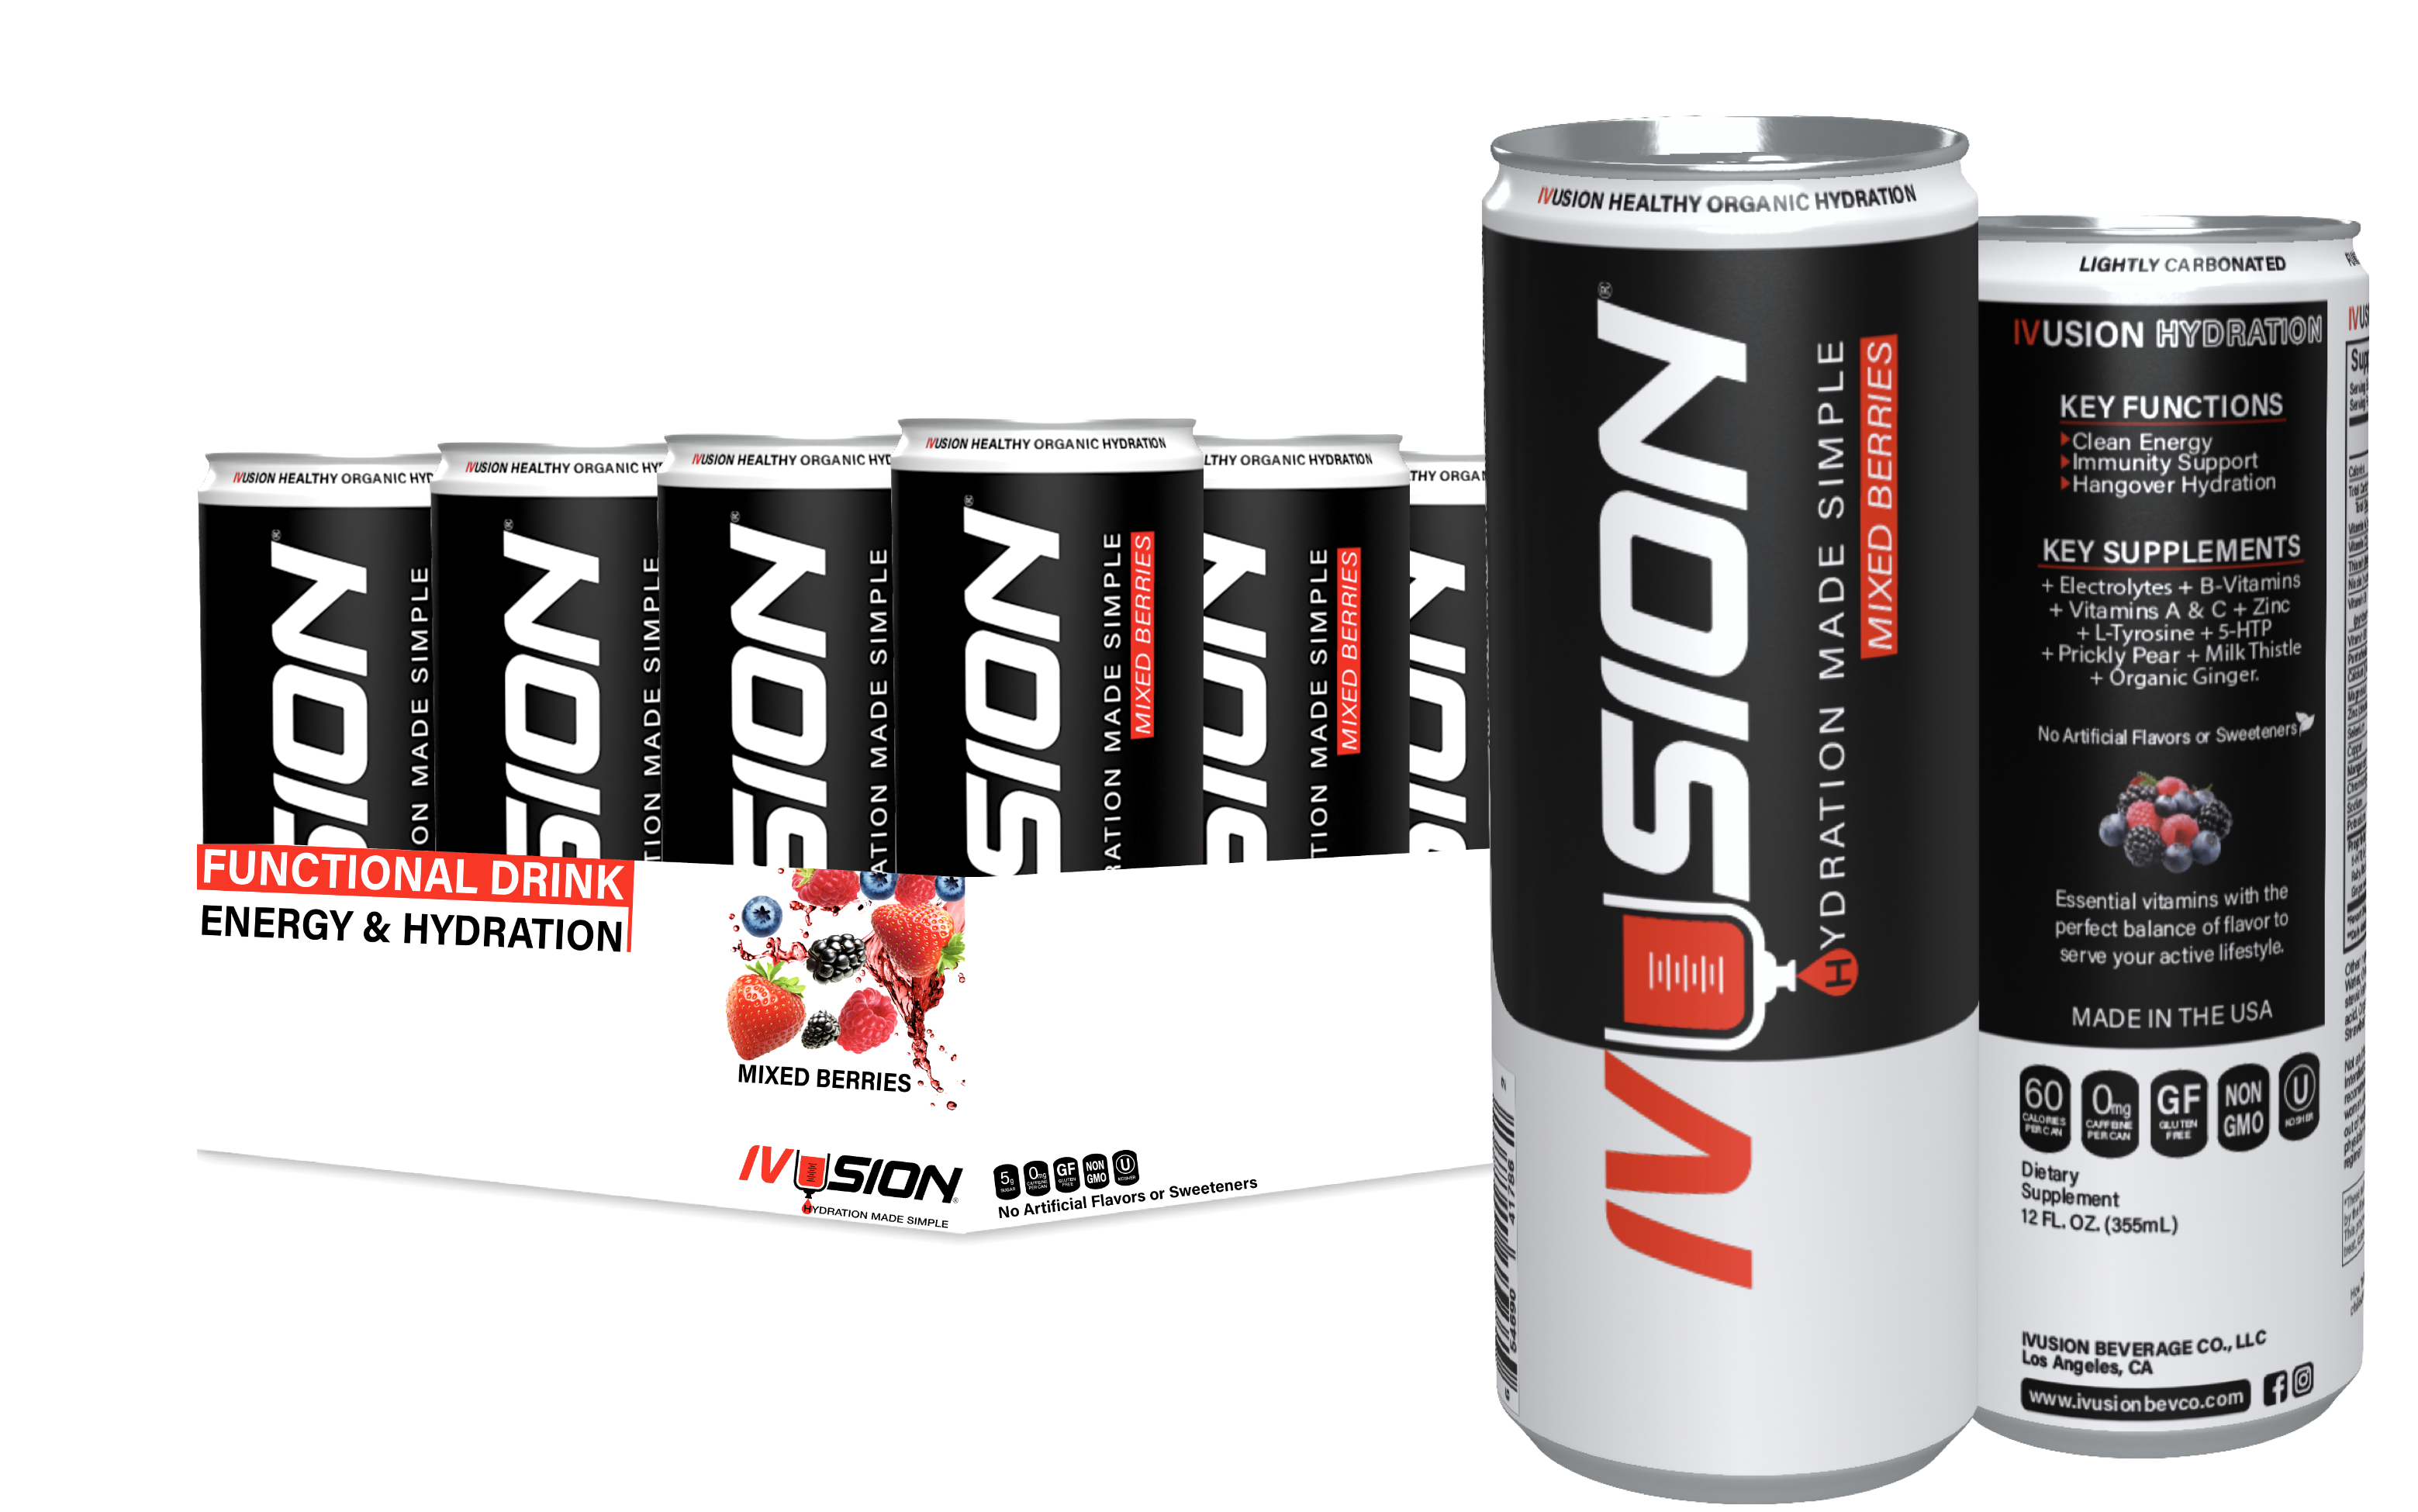 The best hangover drink to cure hangover - IVUSION hydration-1